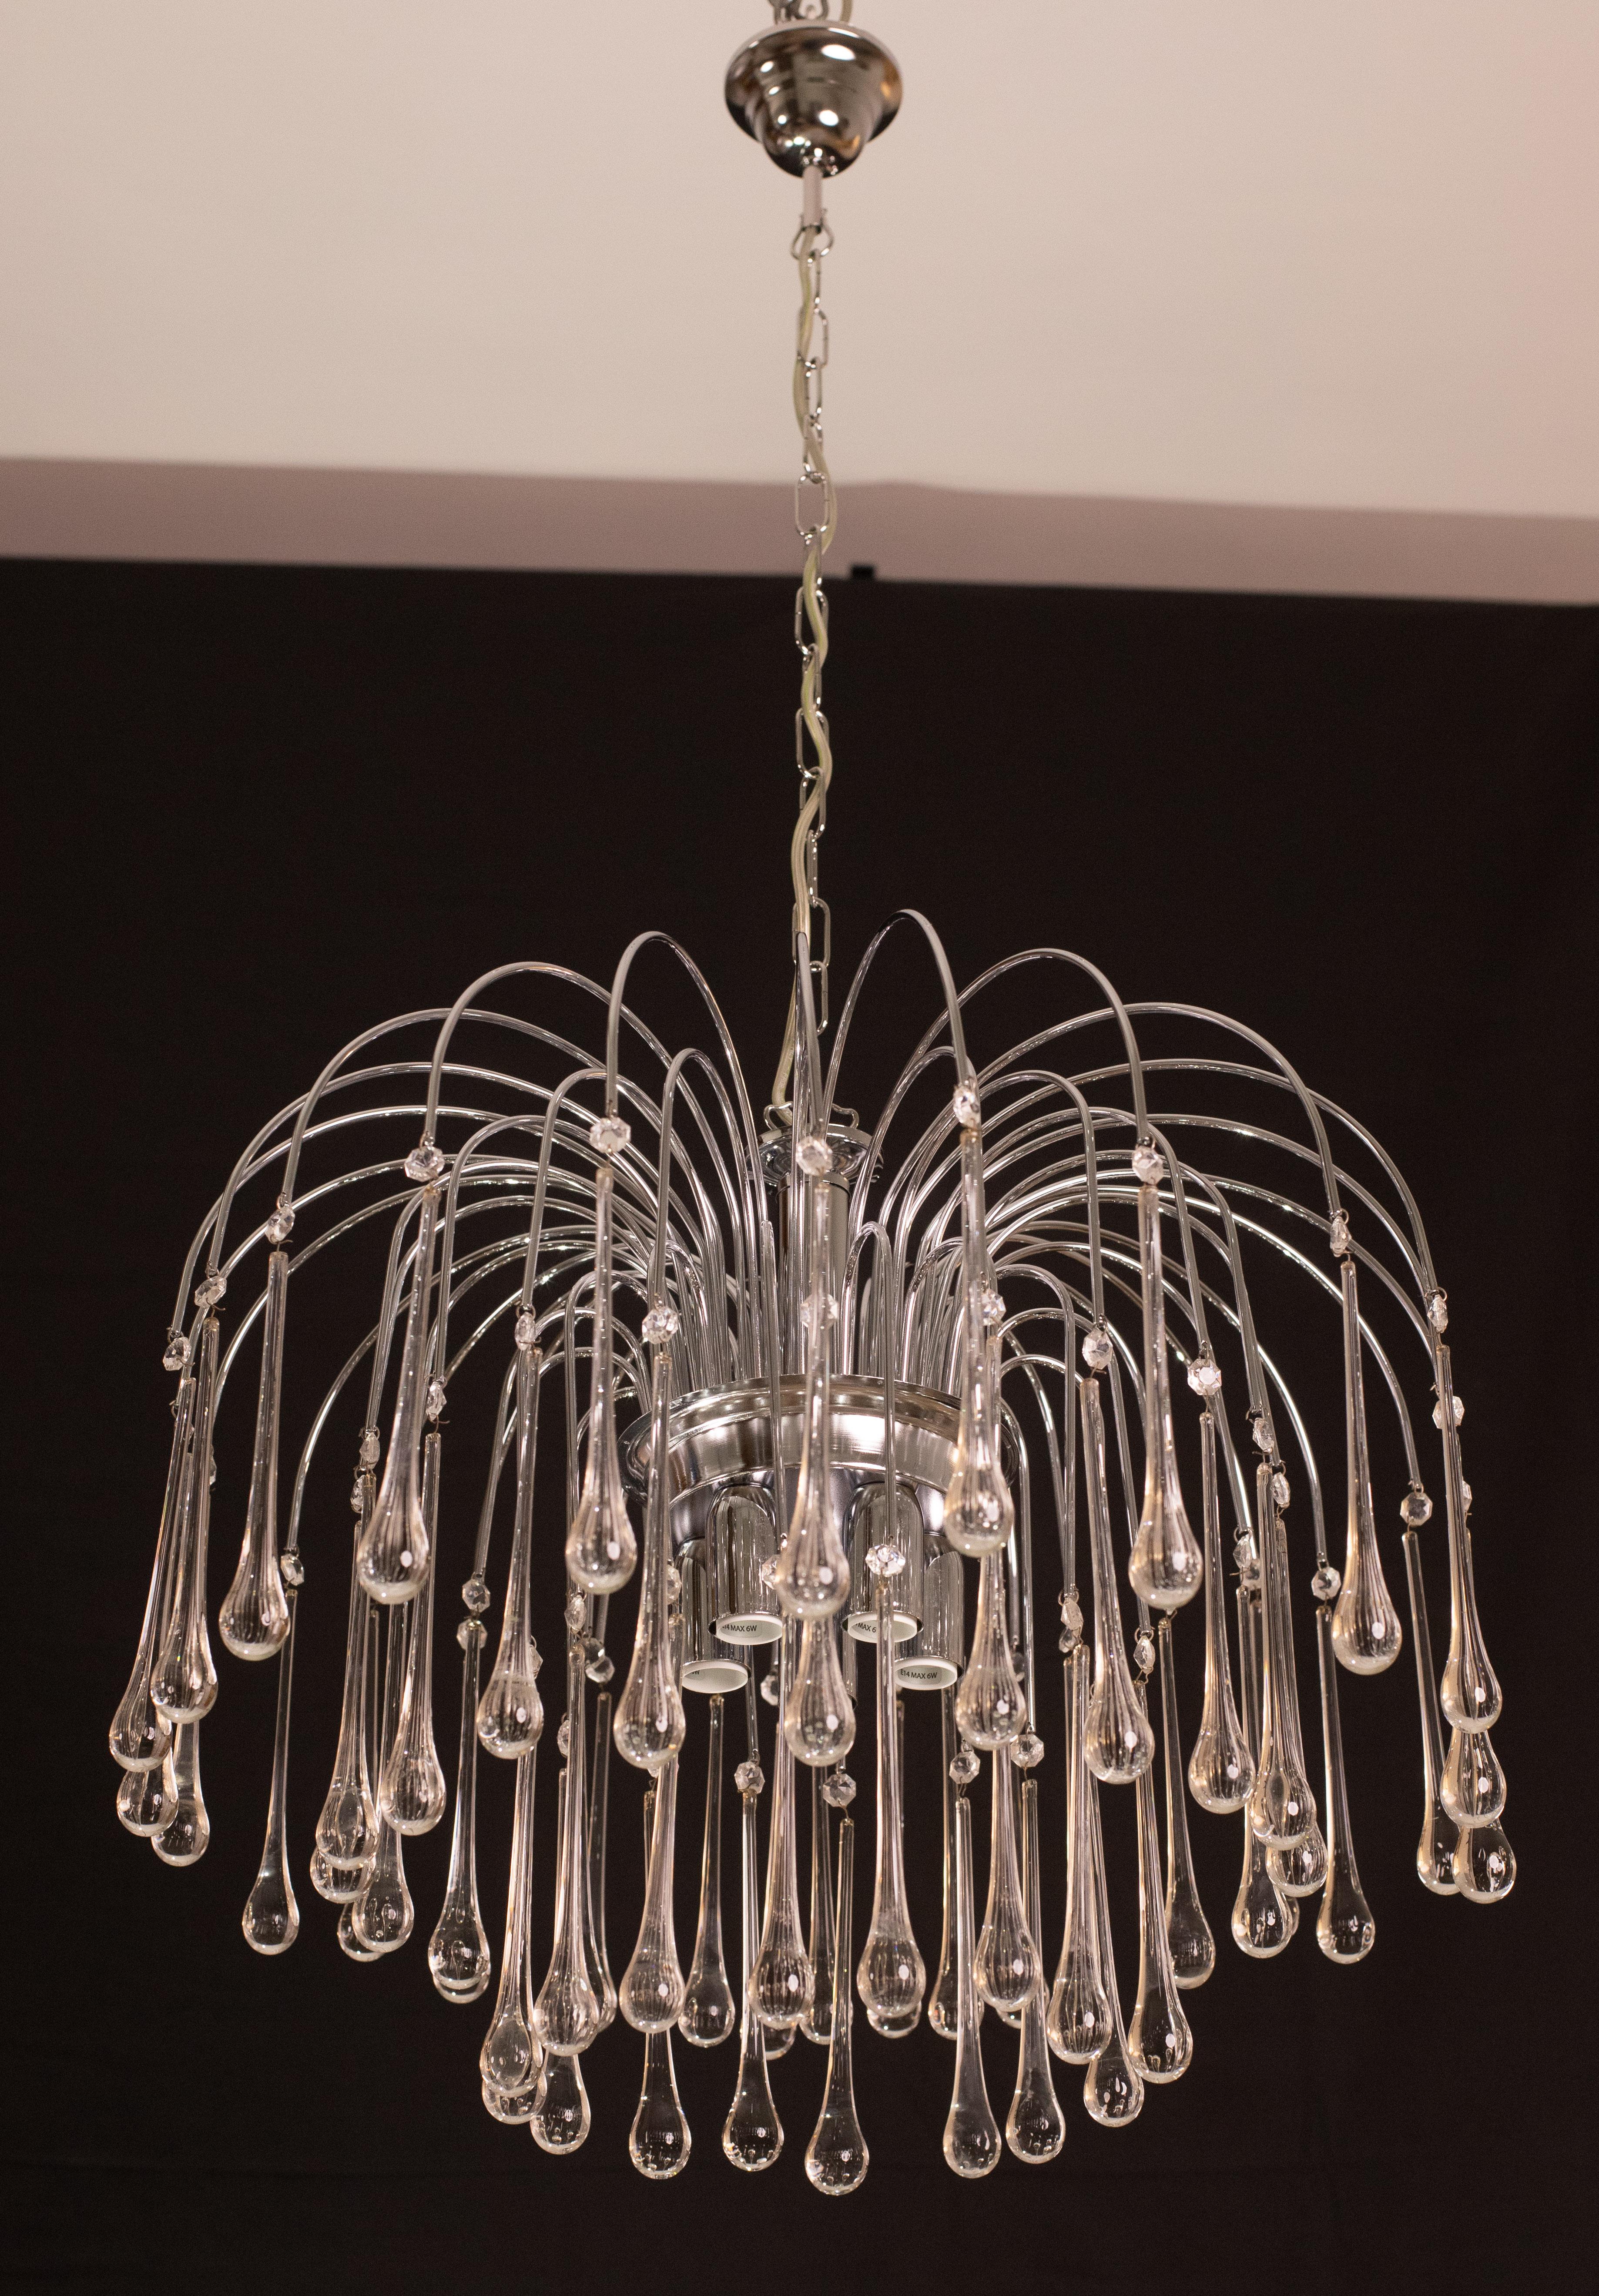 Lady Isabelle Murano Chandelier White Drops, 1980s For Sale 7